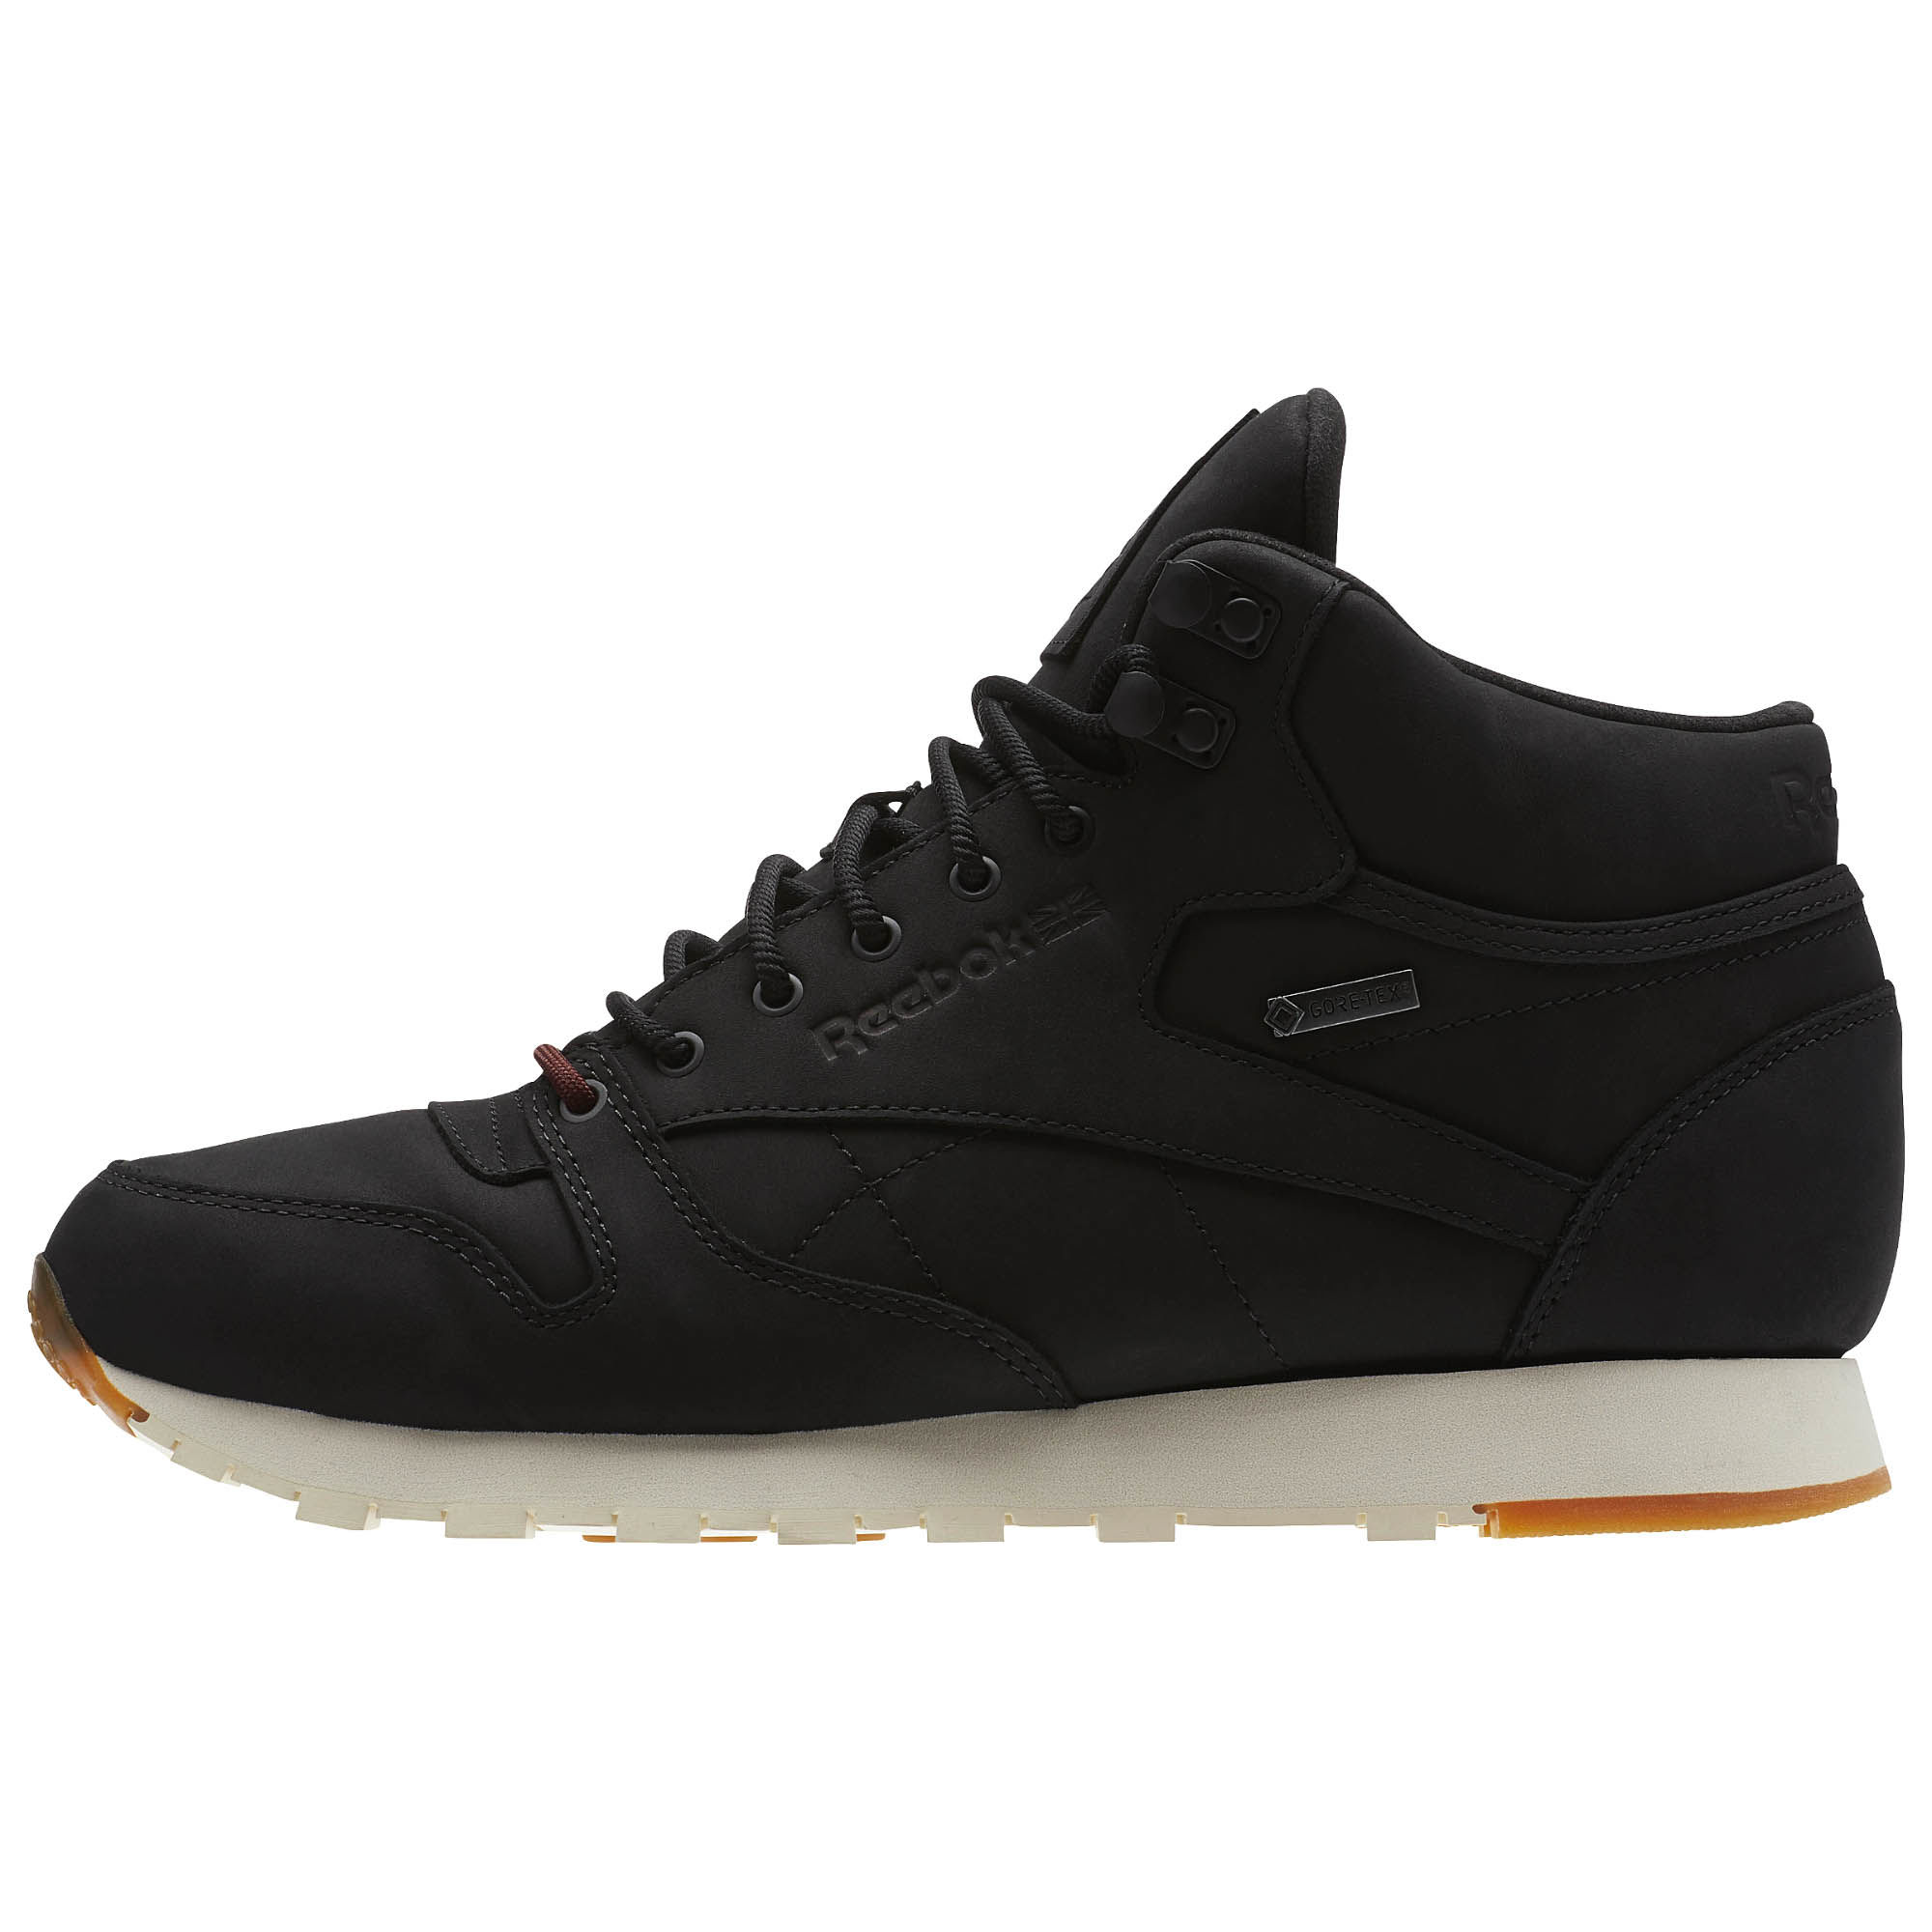 The Reebok Classic Leather Mid is 